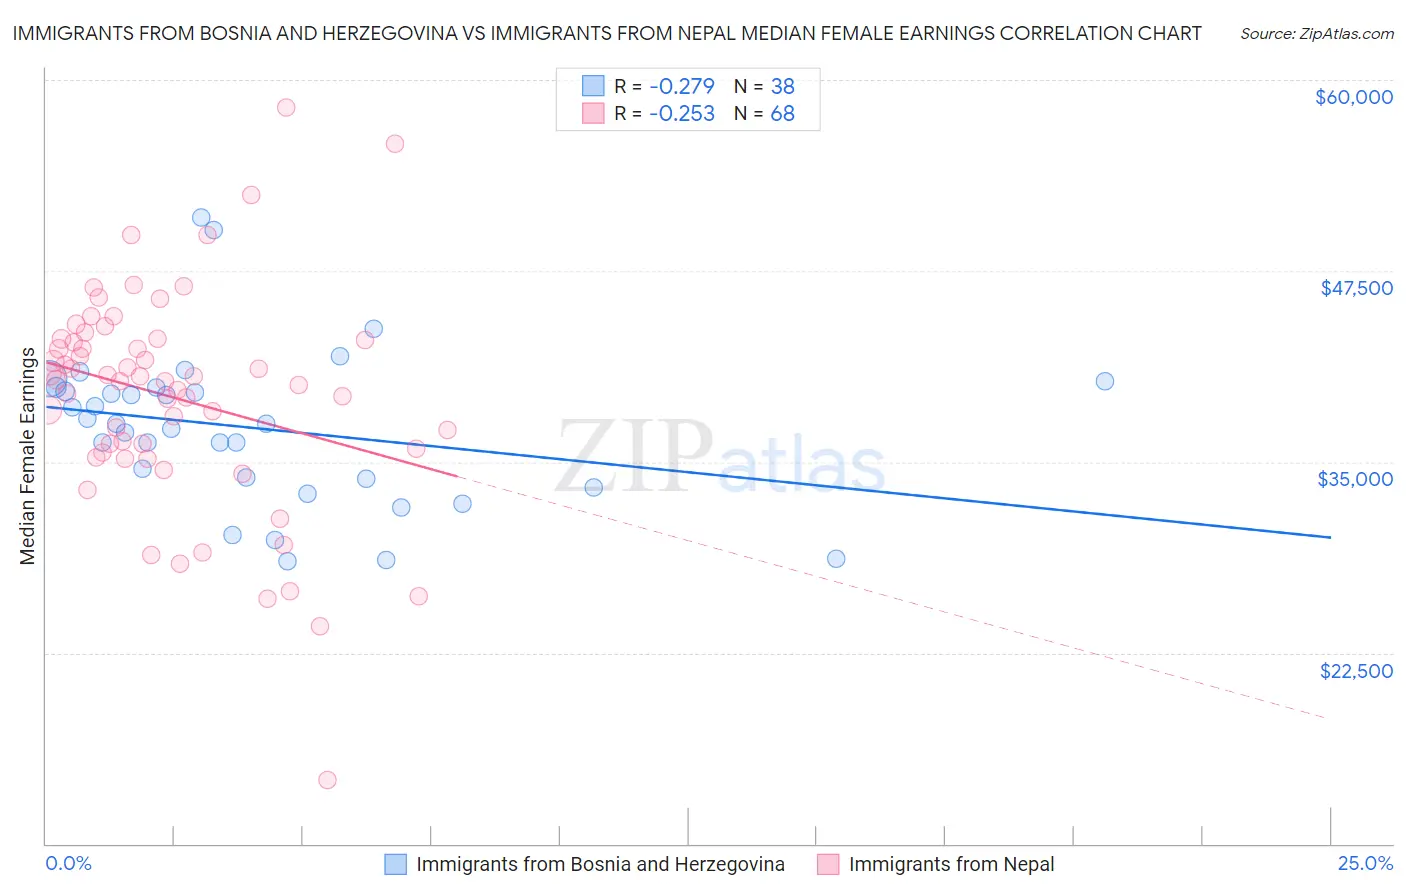 Immigrants from Bosnia and Herzegovina vs Immigrants from Nepal Median Female Earnings